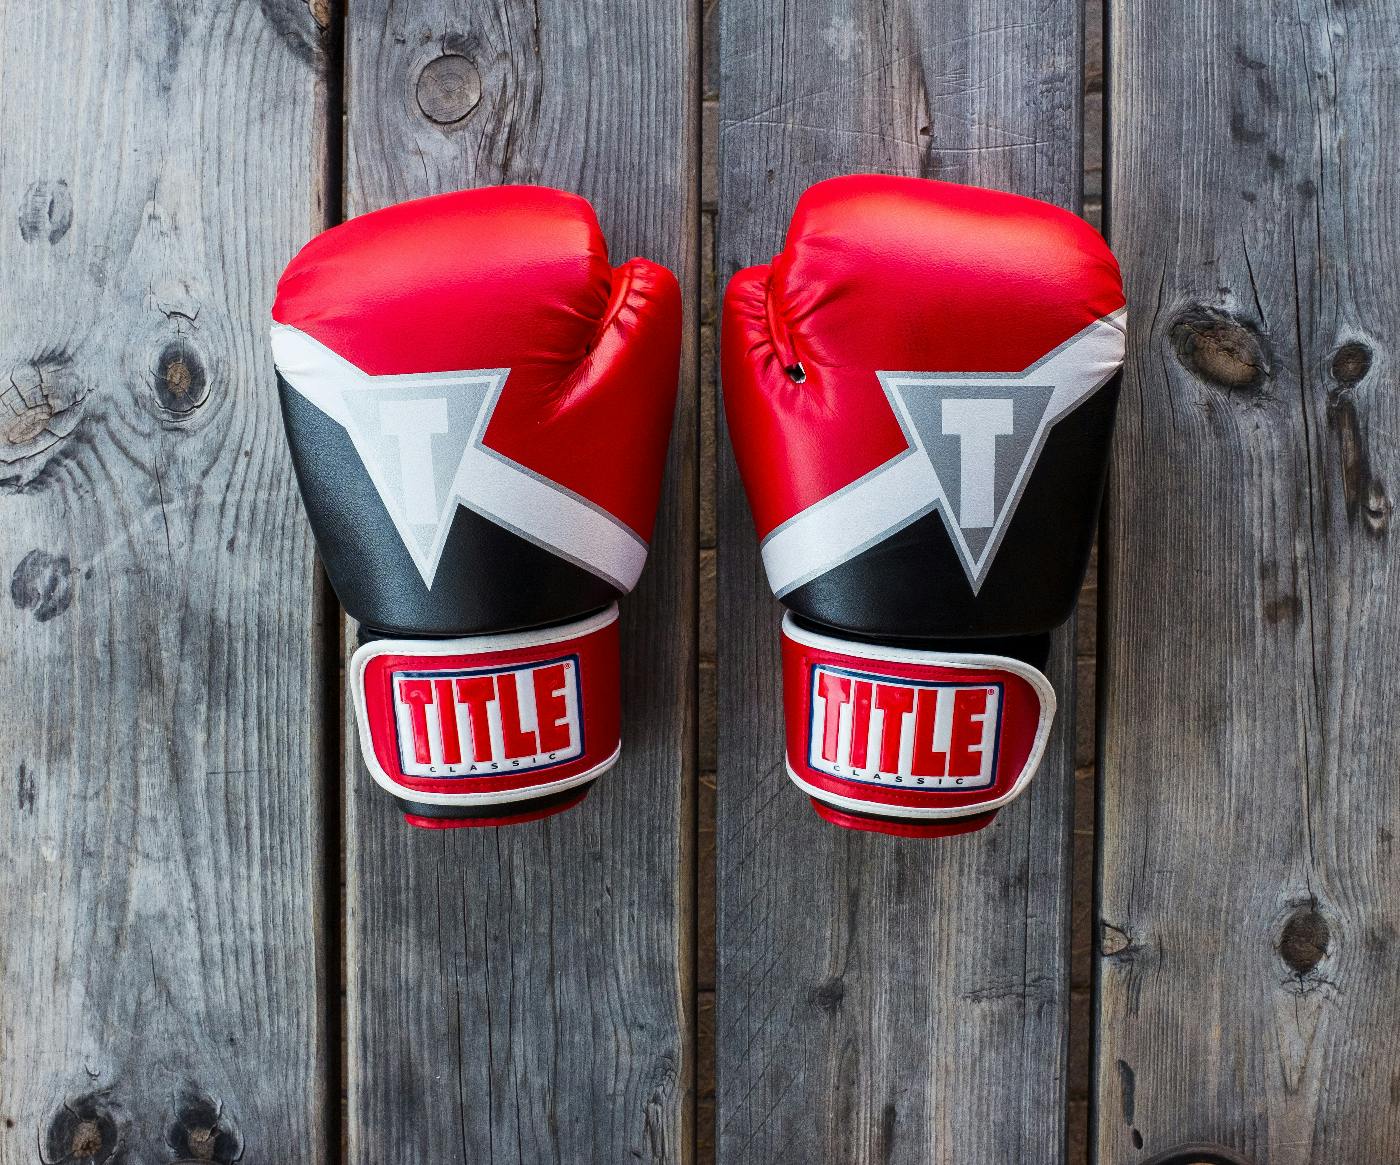 Two Title boxing gloves sitting on a wood slat table